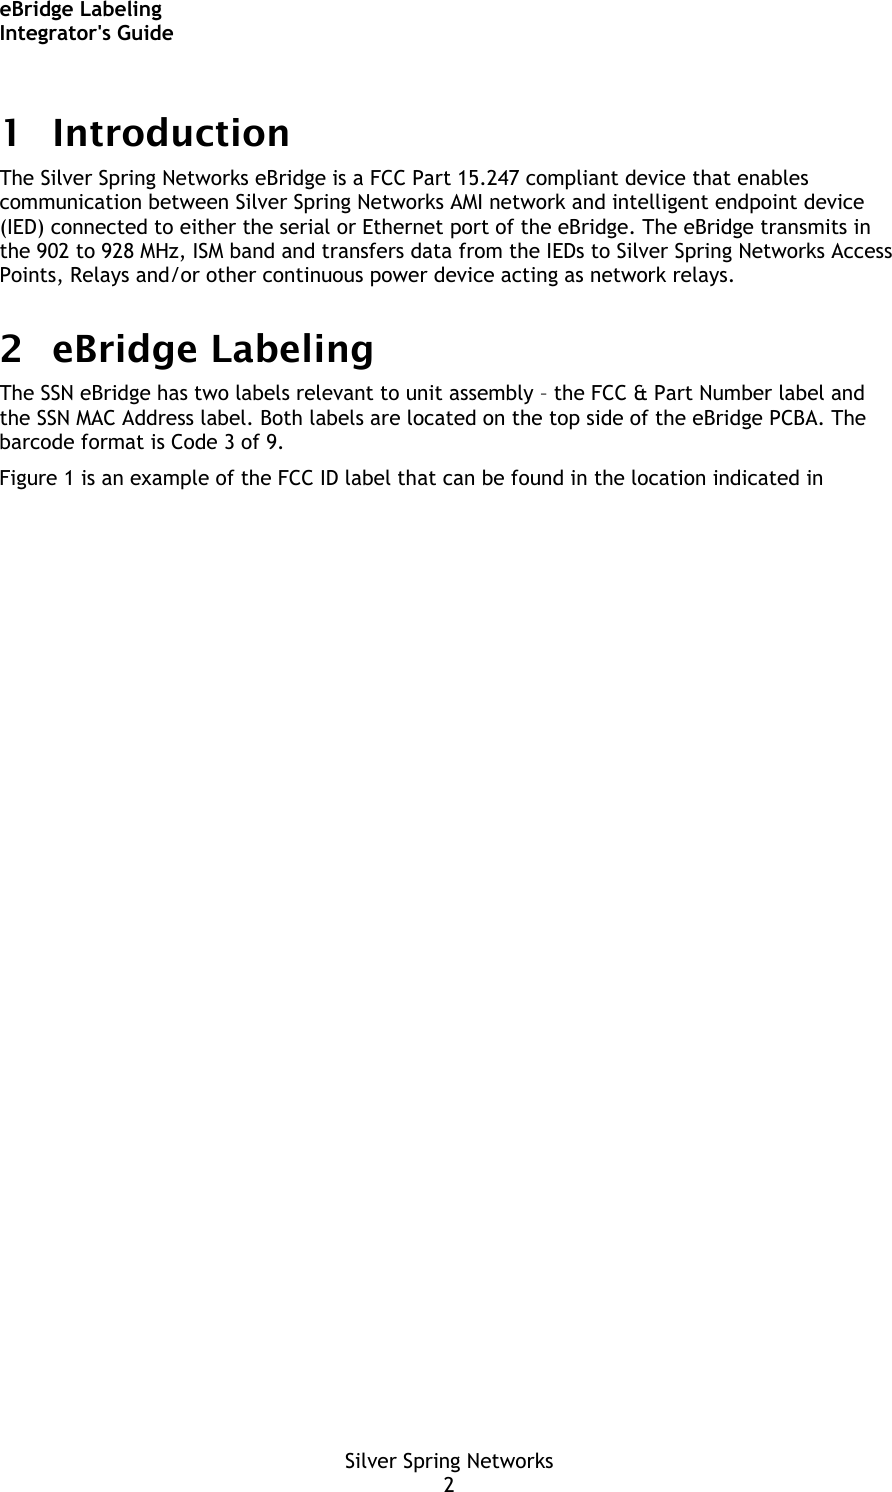 eBridge Labeling Integrator&apos;s Guide Silver Spring Networks 2 1 Introduction The Silver Spring Networks eBridge is a FCC Part 15.247 compliant device that enables communication between Silver Spring Networks AMI network and intelligent endpoint device (IED) connected to either the serial or Ethernet port of the eBridge. The eBridge transmits in the 902 to 928 MHz, ISM band and transfers data from the IEDs to Silver Spring Networks Access Points, Relays and/or other continuous power device acting as network relays. 2 eBridge Labeling The SSN eBridge has two labels relevant to unit assembly – the FCC &amp; Part Number label and the SSN MAC Address label. Both labels are located on the top side of the eBridge PCBA. The barcode format is Code 3 of 9. Figure 1 is an example of the FCC ID label that can be found in the location indicated in 